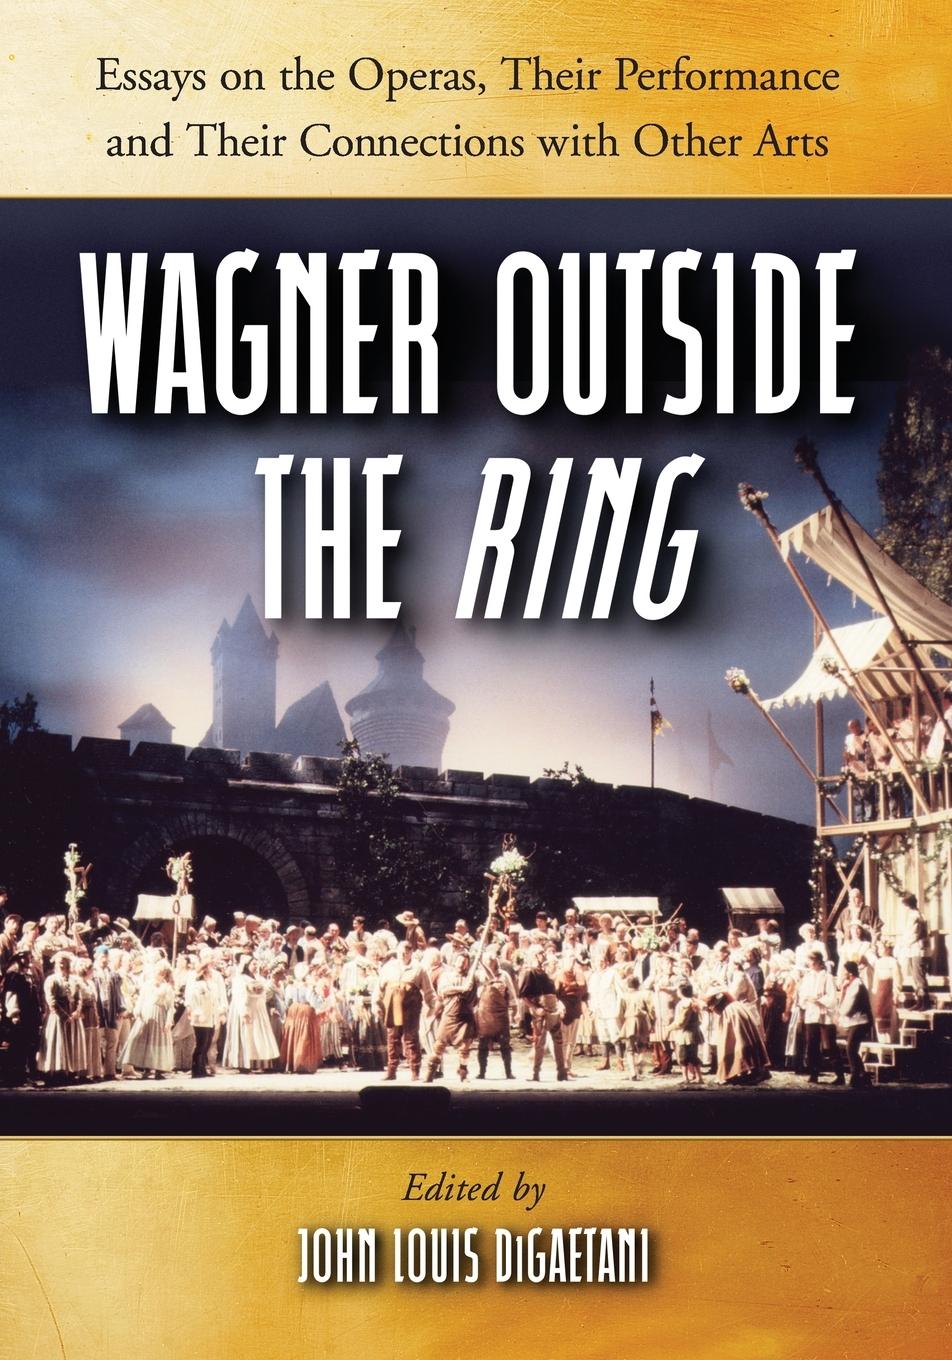 Wagner Outside the\\ \\ Ri